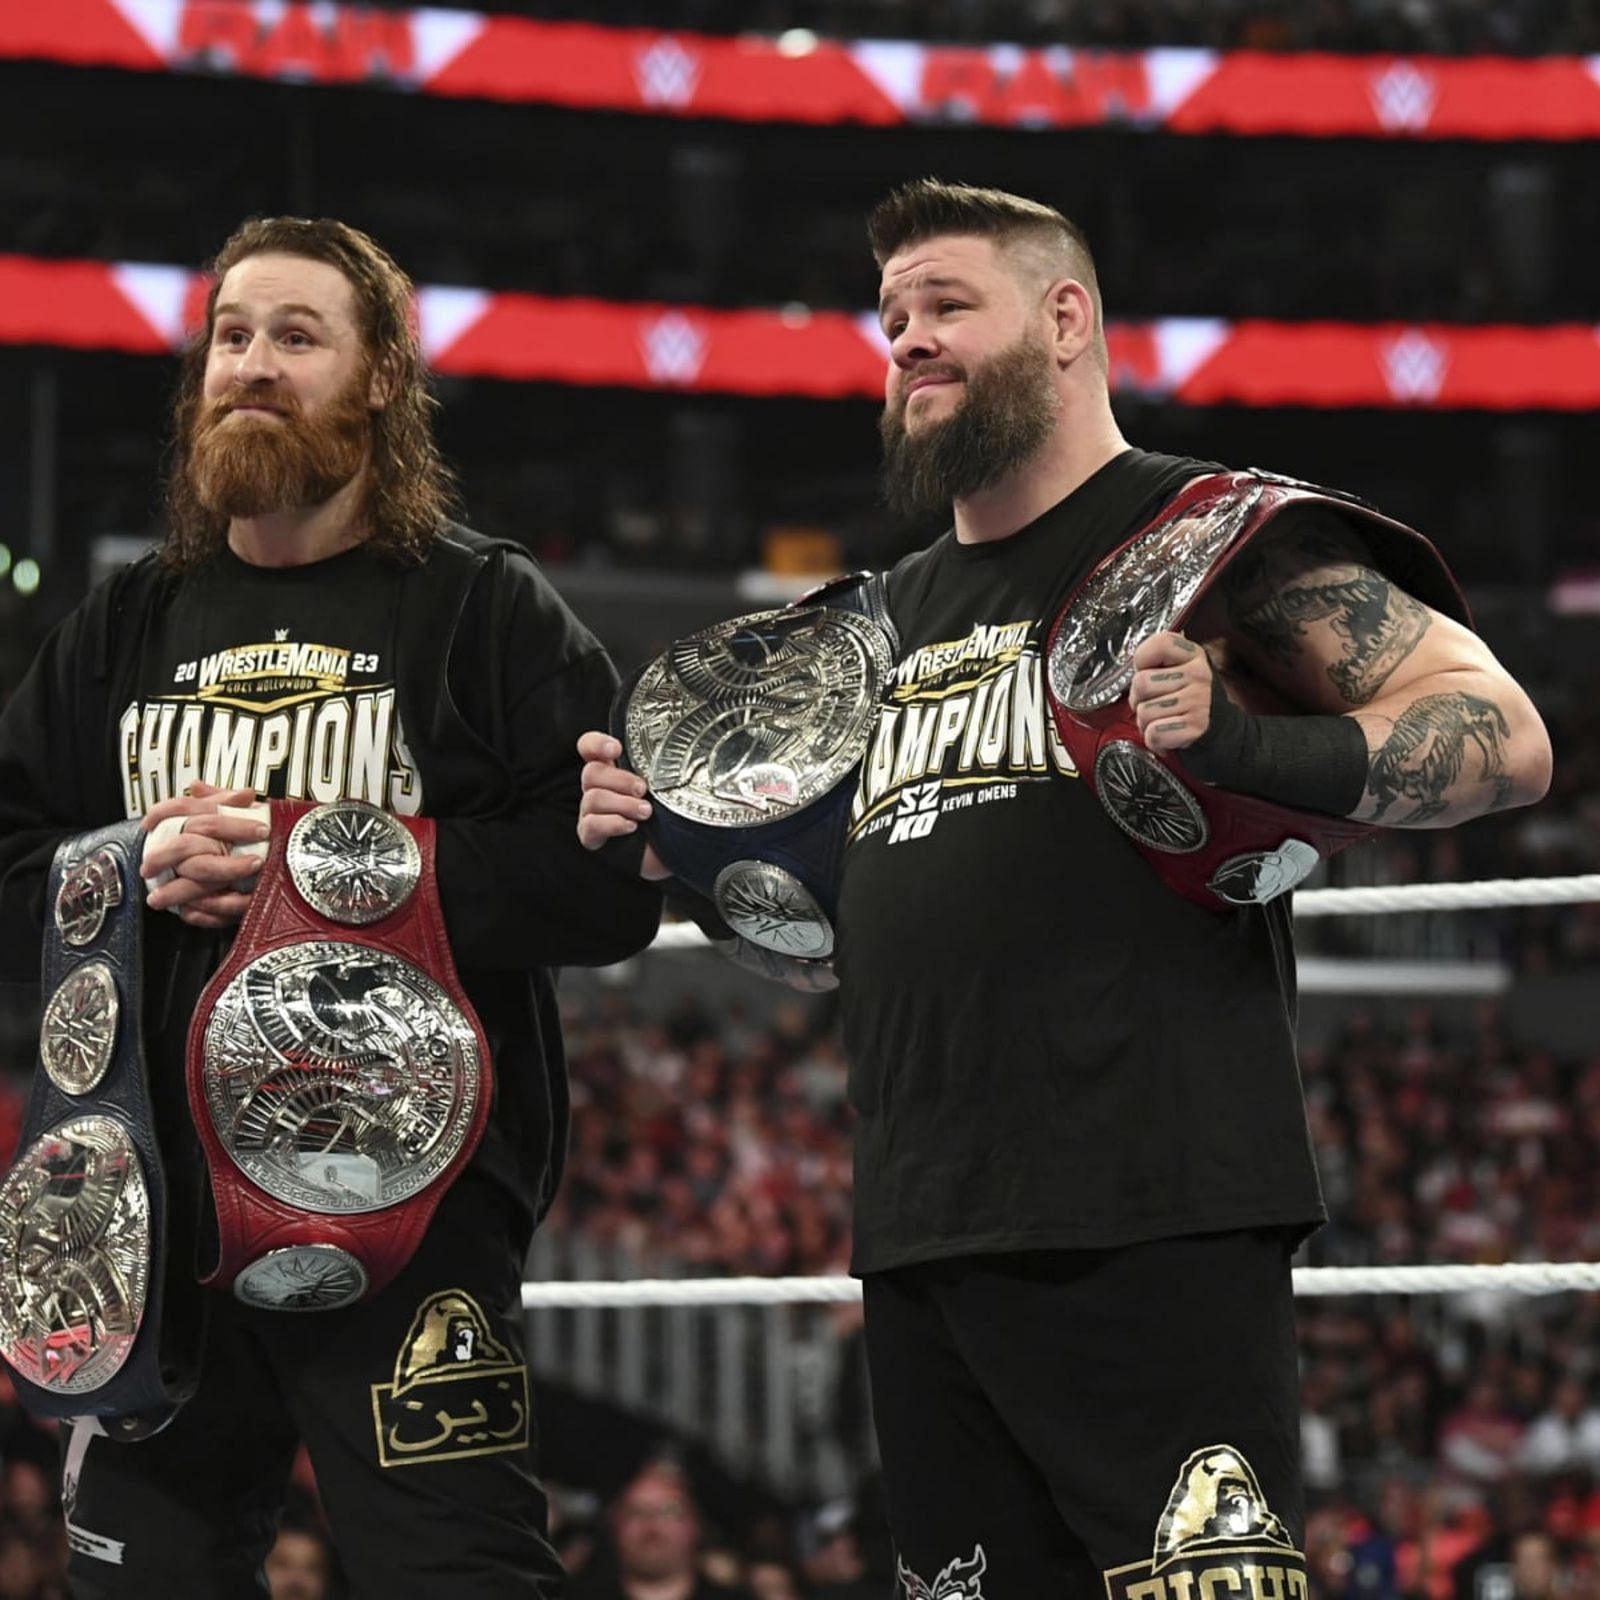 Could the Undisputed Tag Team Champs be left out in Detroit?